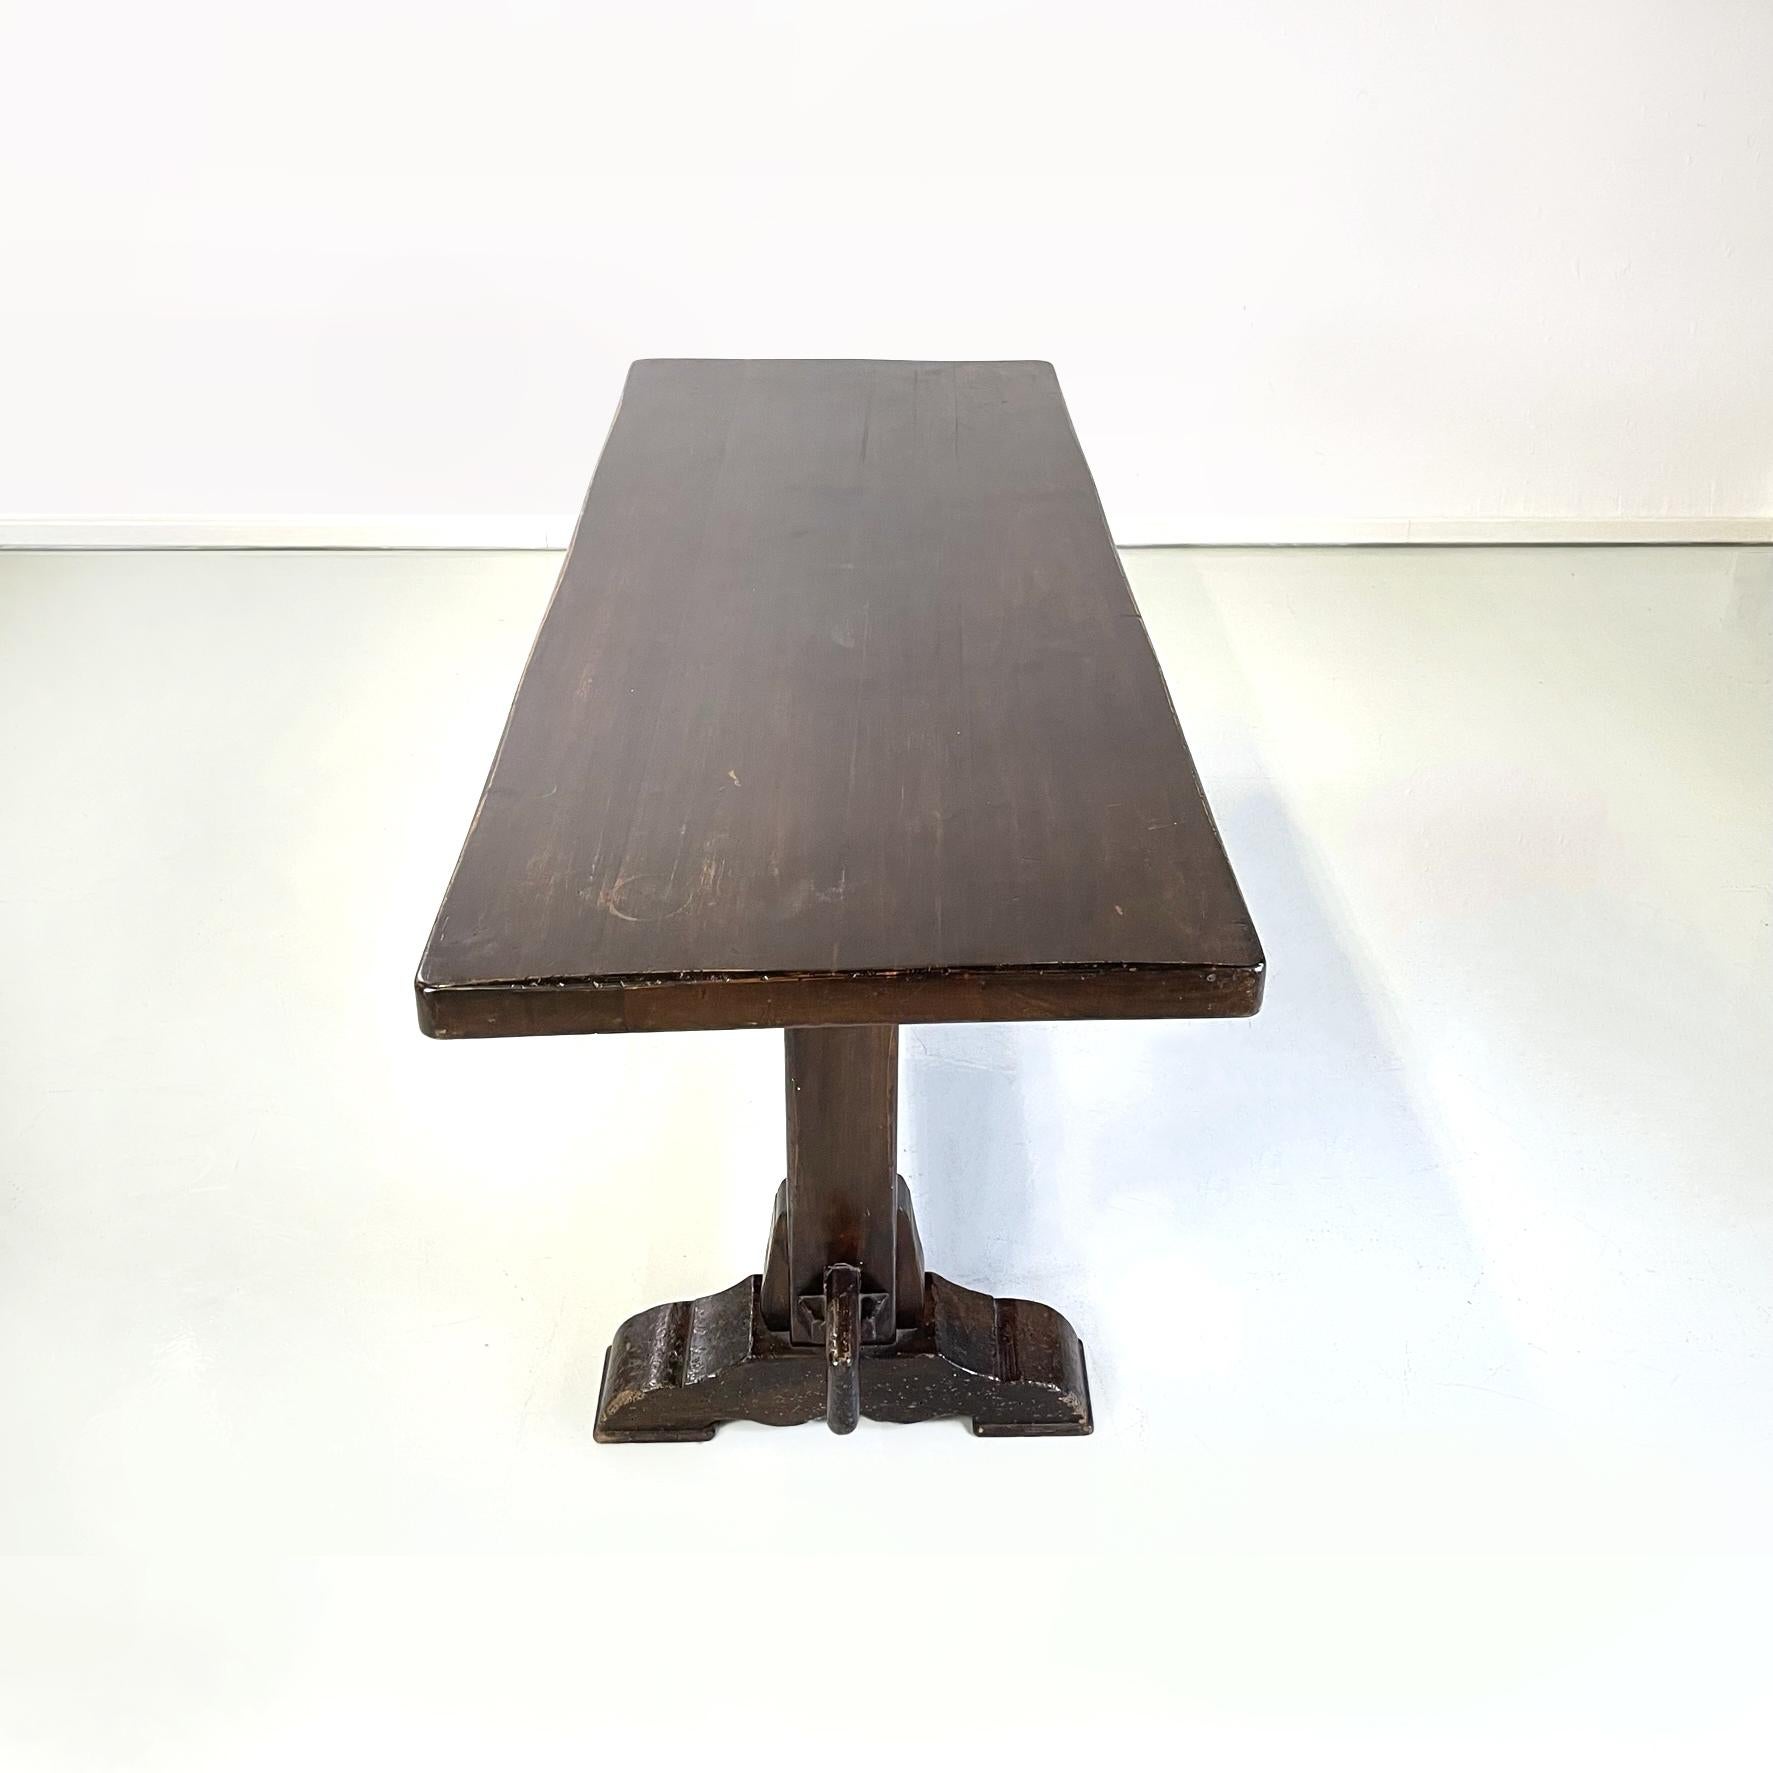 Early 20th Century Italian Antique Wooden Rectangular Dining Table, Early 1900s